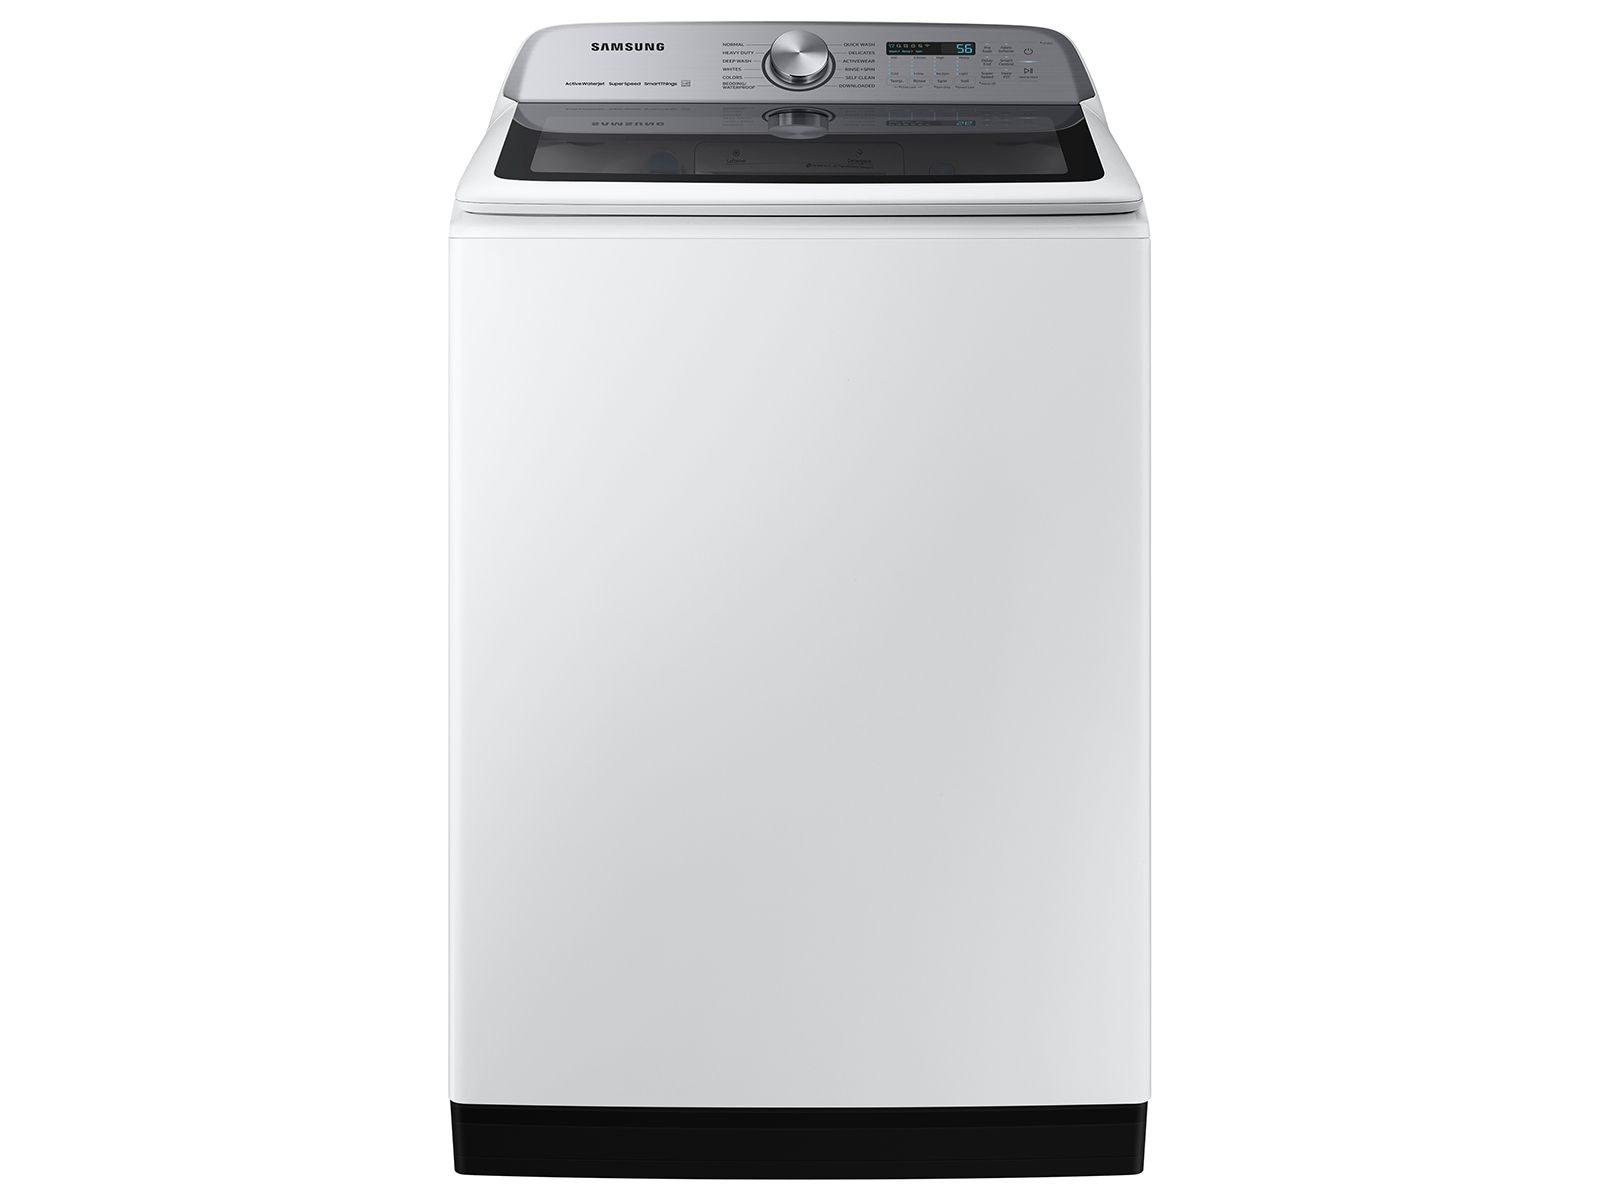 Samsung 5.2 cu. ft. Large Capacity Smart Top Load Washer with Super Speed Wash in White(WA52A5500AW/US)